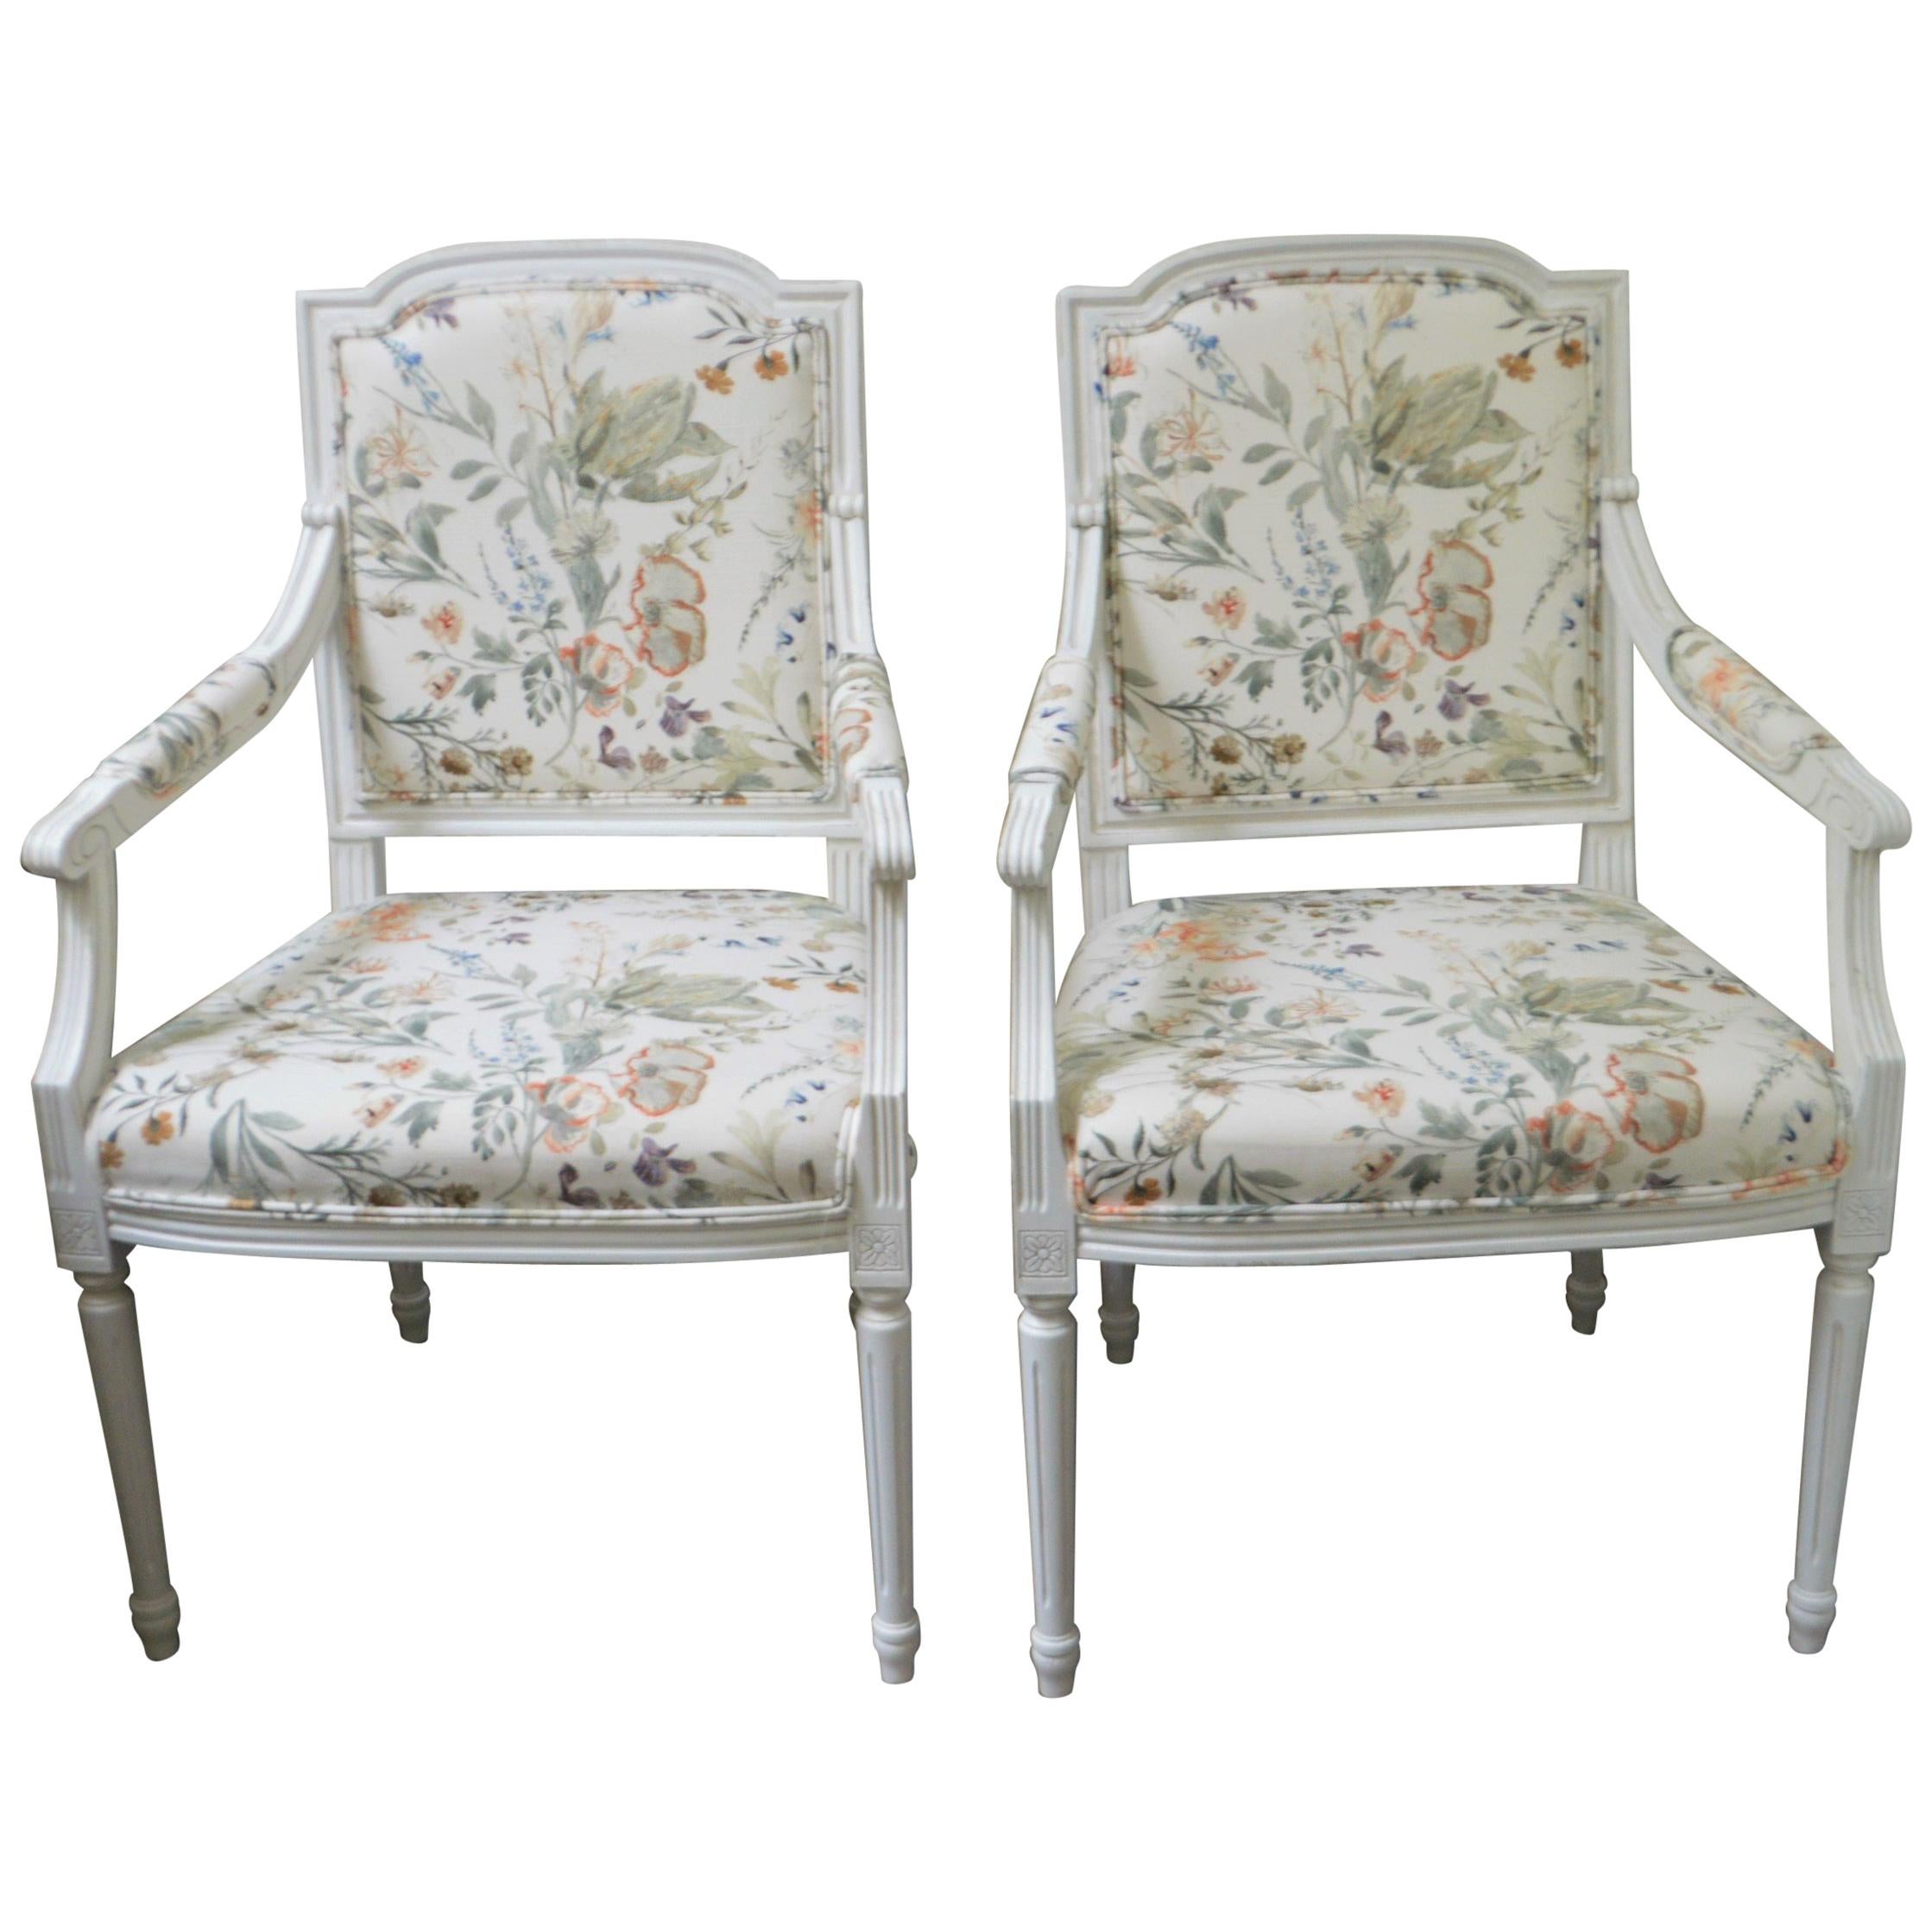 Pair of Louis XVI Style White Painted Armchairs, Upholstered with a Print Fabric For Sale